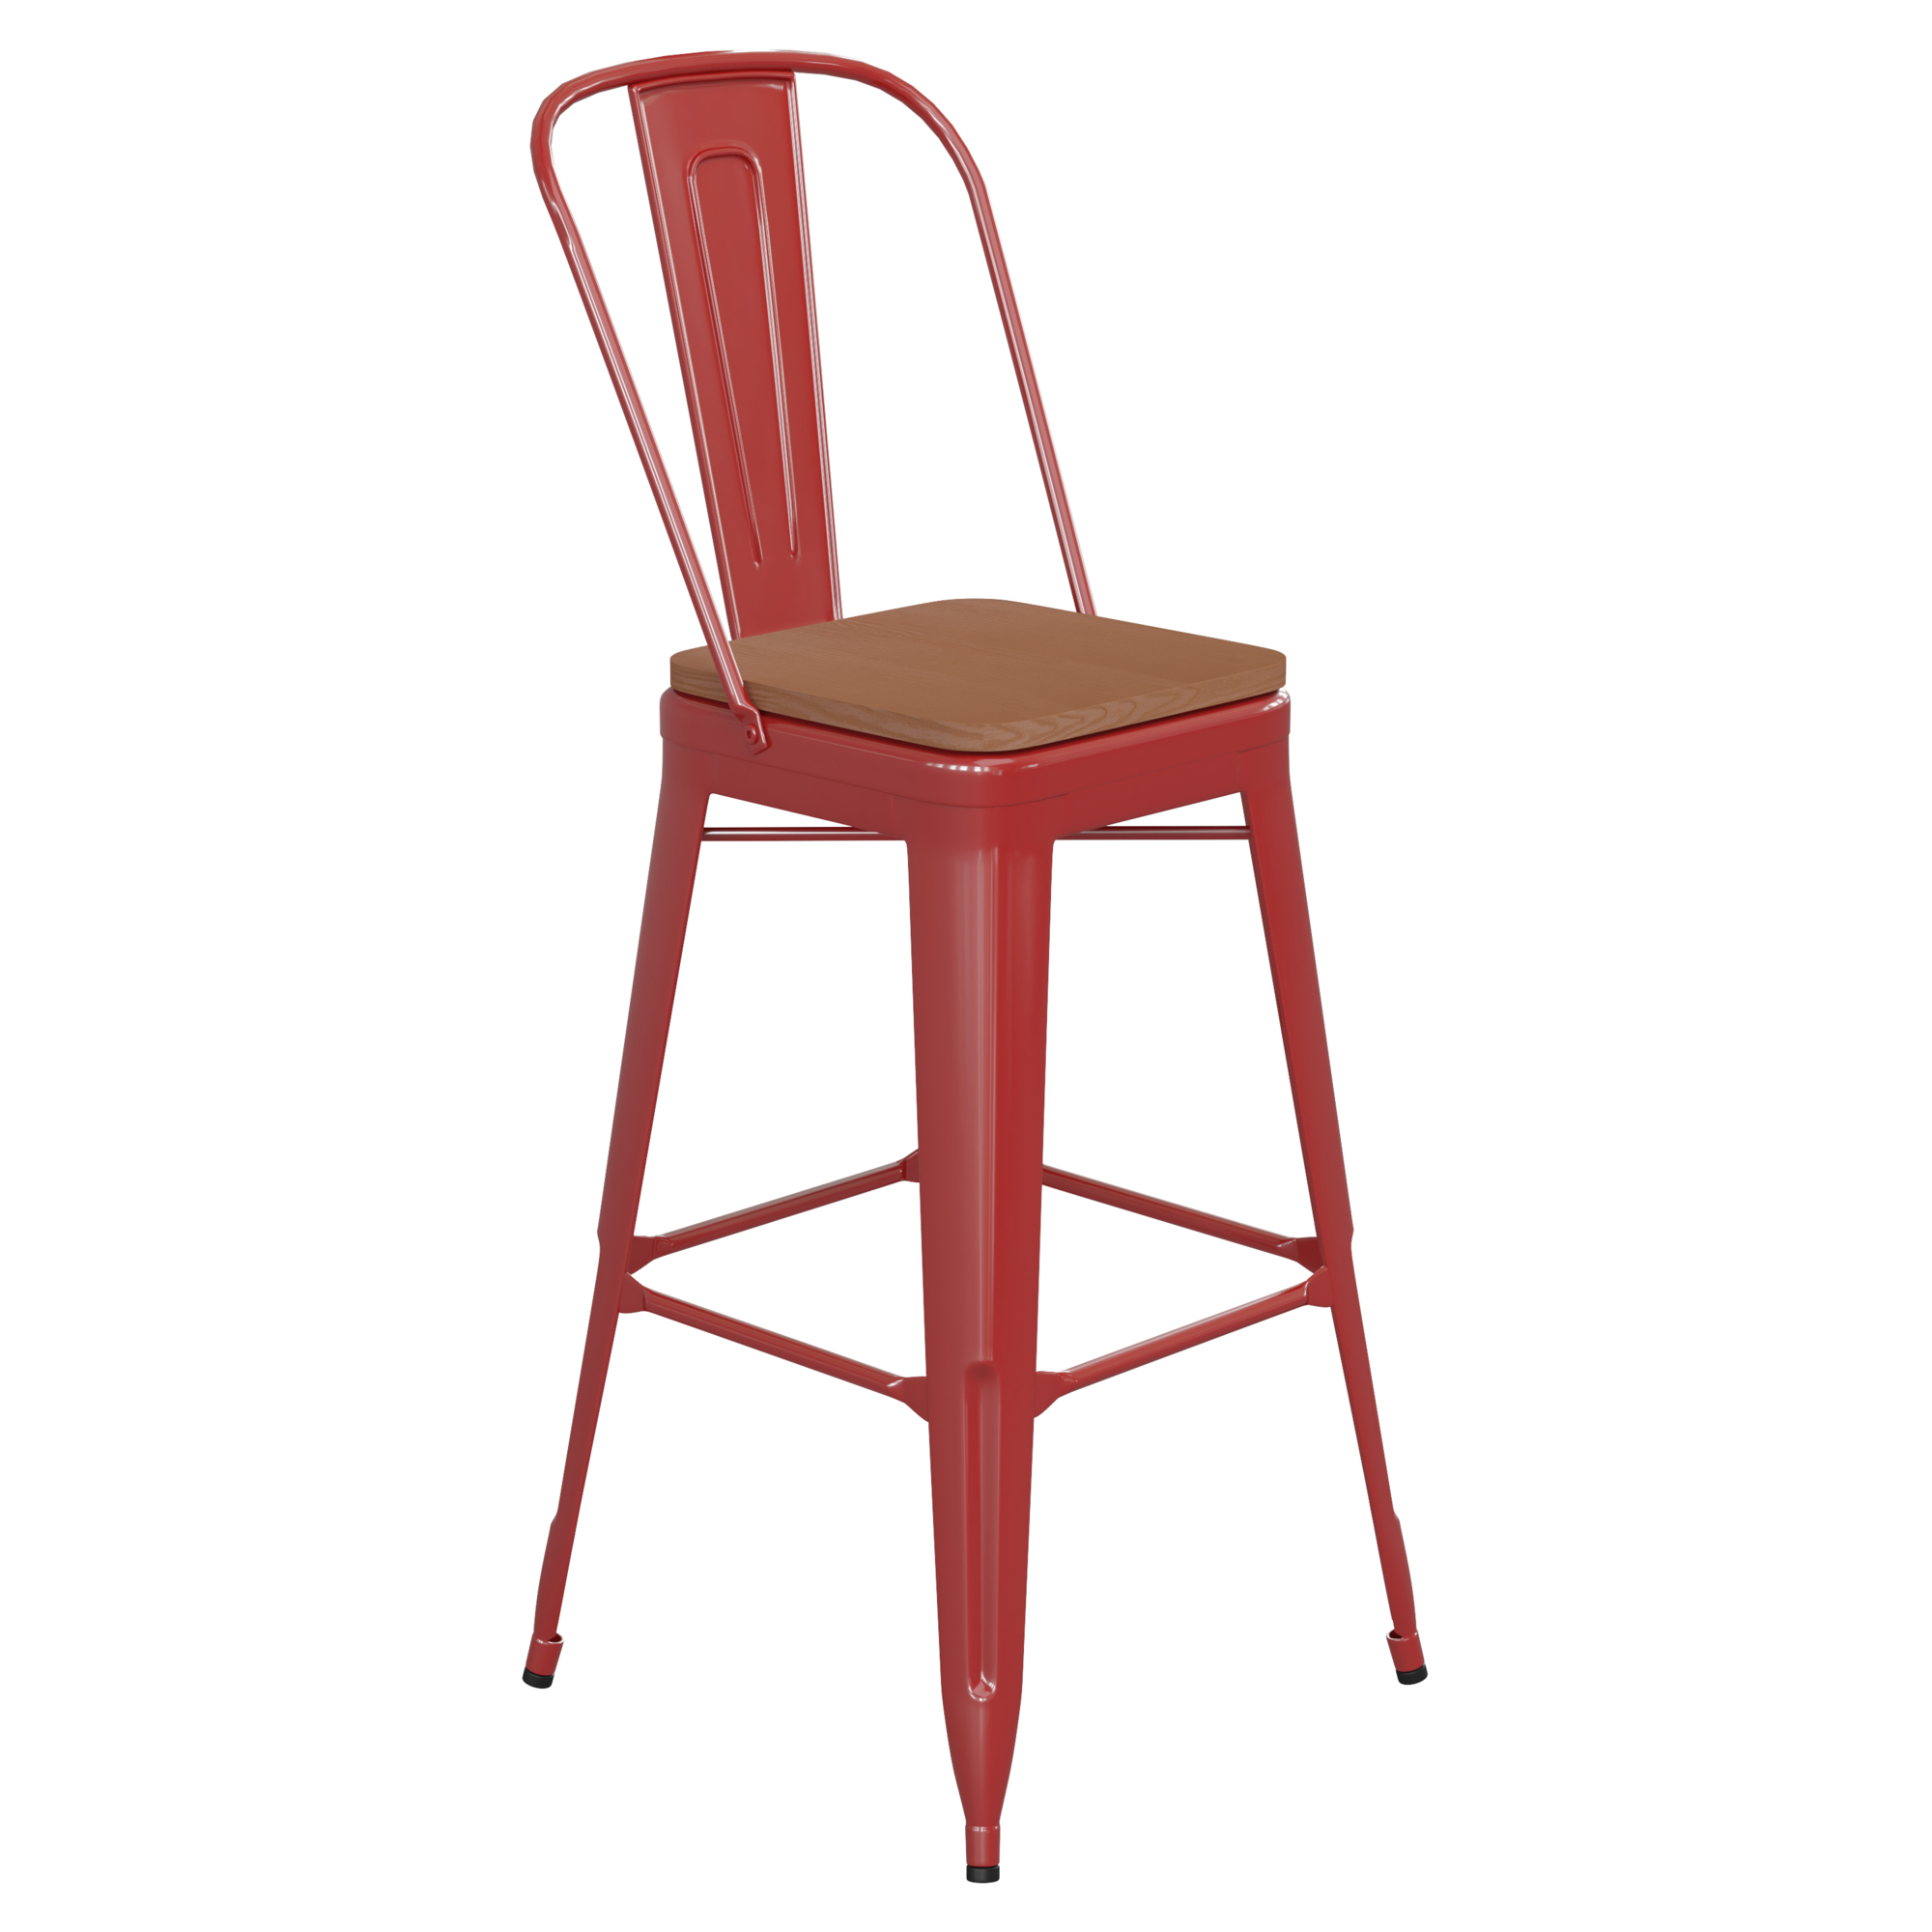 Flash Furniture, 30Inch Red Metal Counter Stool-Teak Poly Seat, Primary Color Red, Included (qty.) 1, Model CH3132030GBRP2T